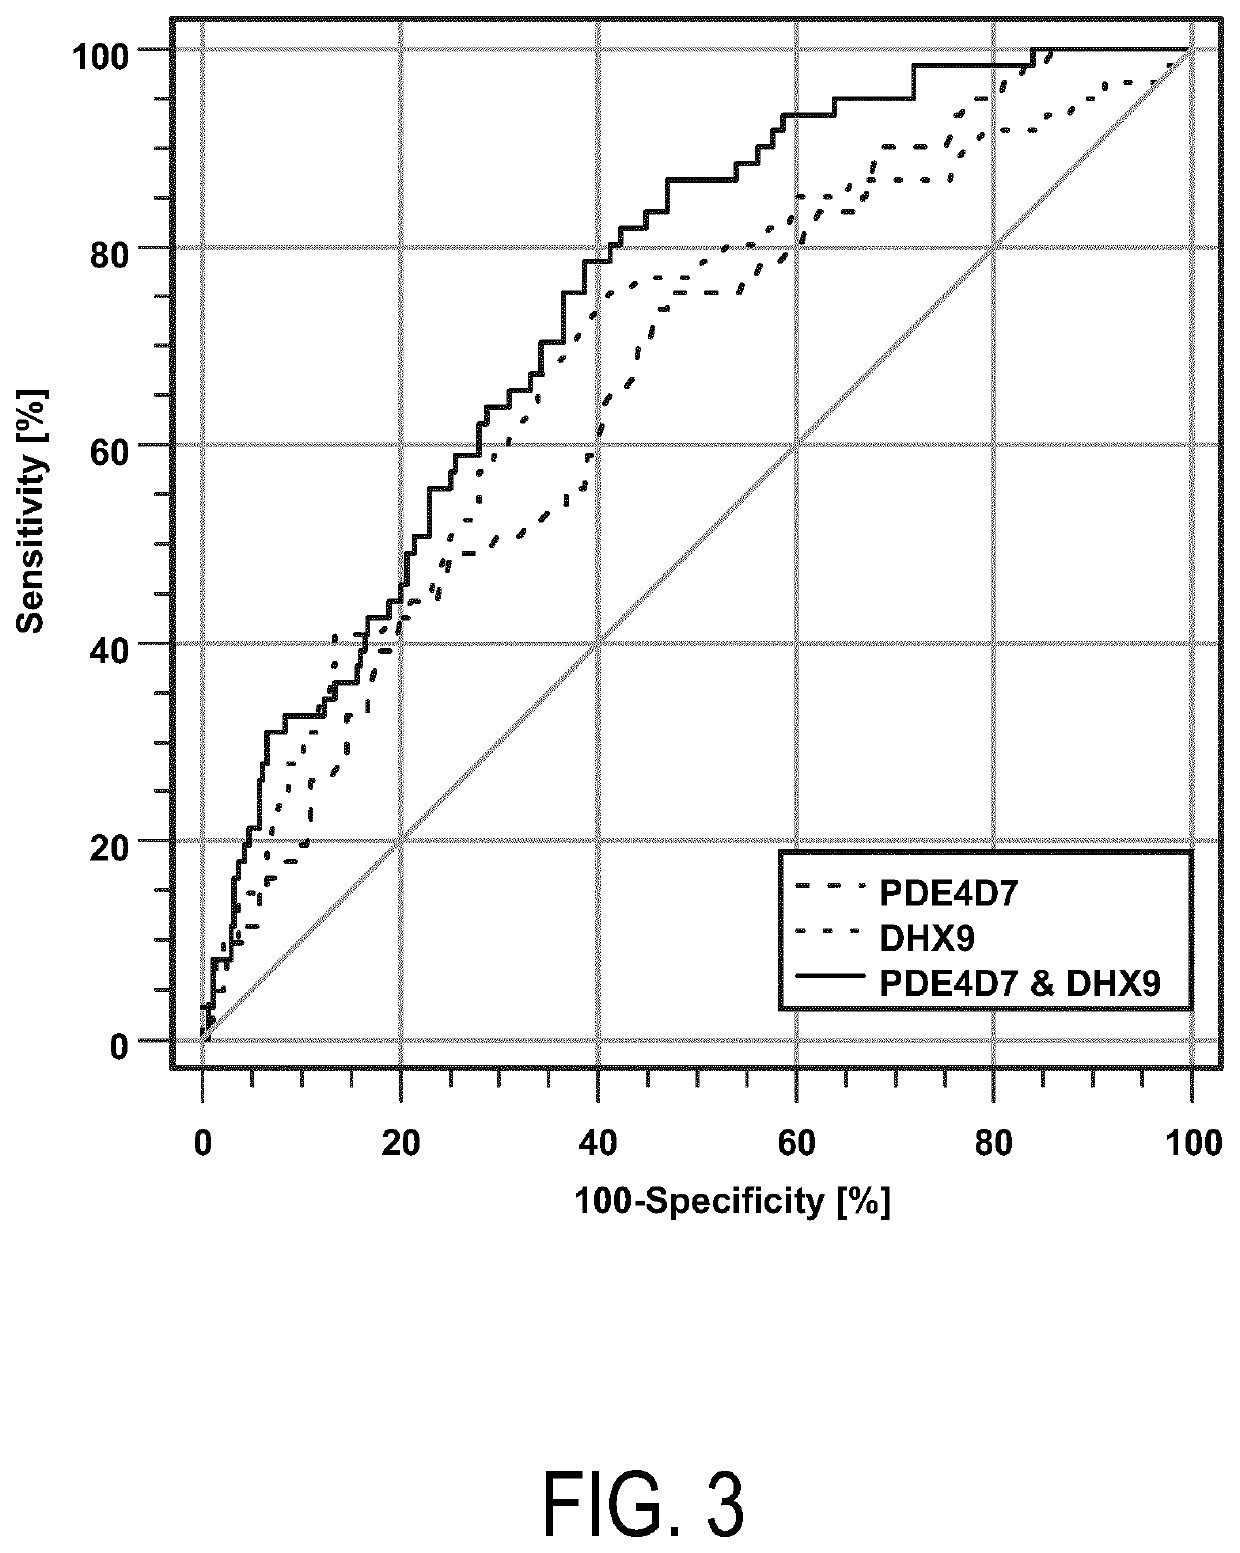 Pre-surgical risk stratification based on pde4d7 and dhx9 expression